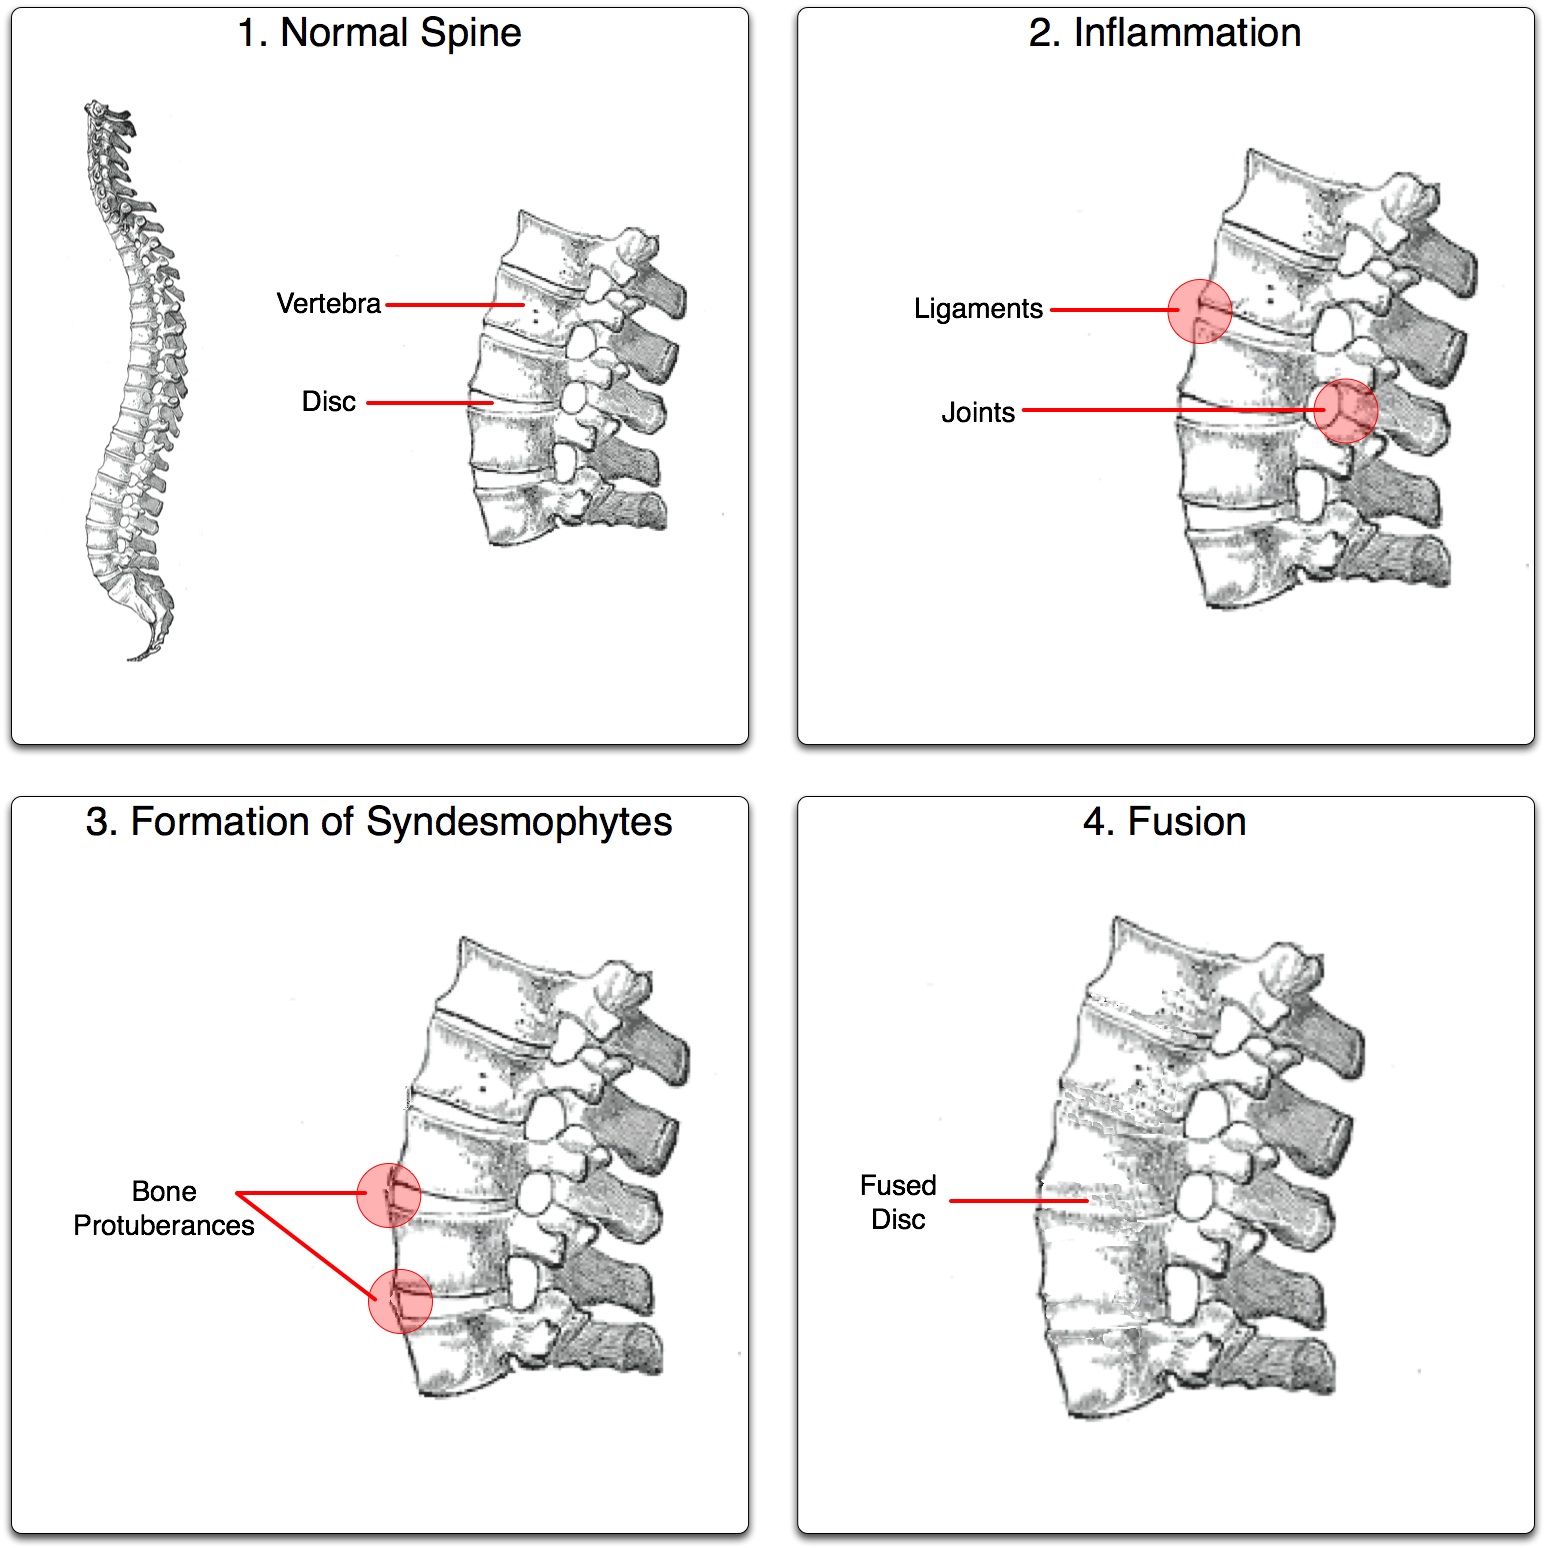 4 illustrations. 1. Normal spine. 2. Inflammation 3. Syndesmophytes 4. Fusion